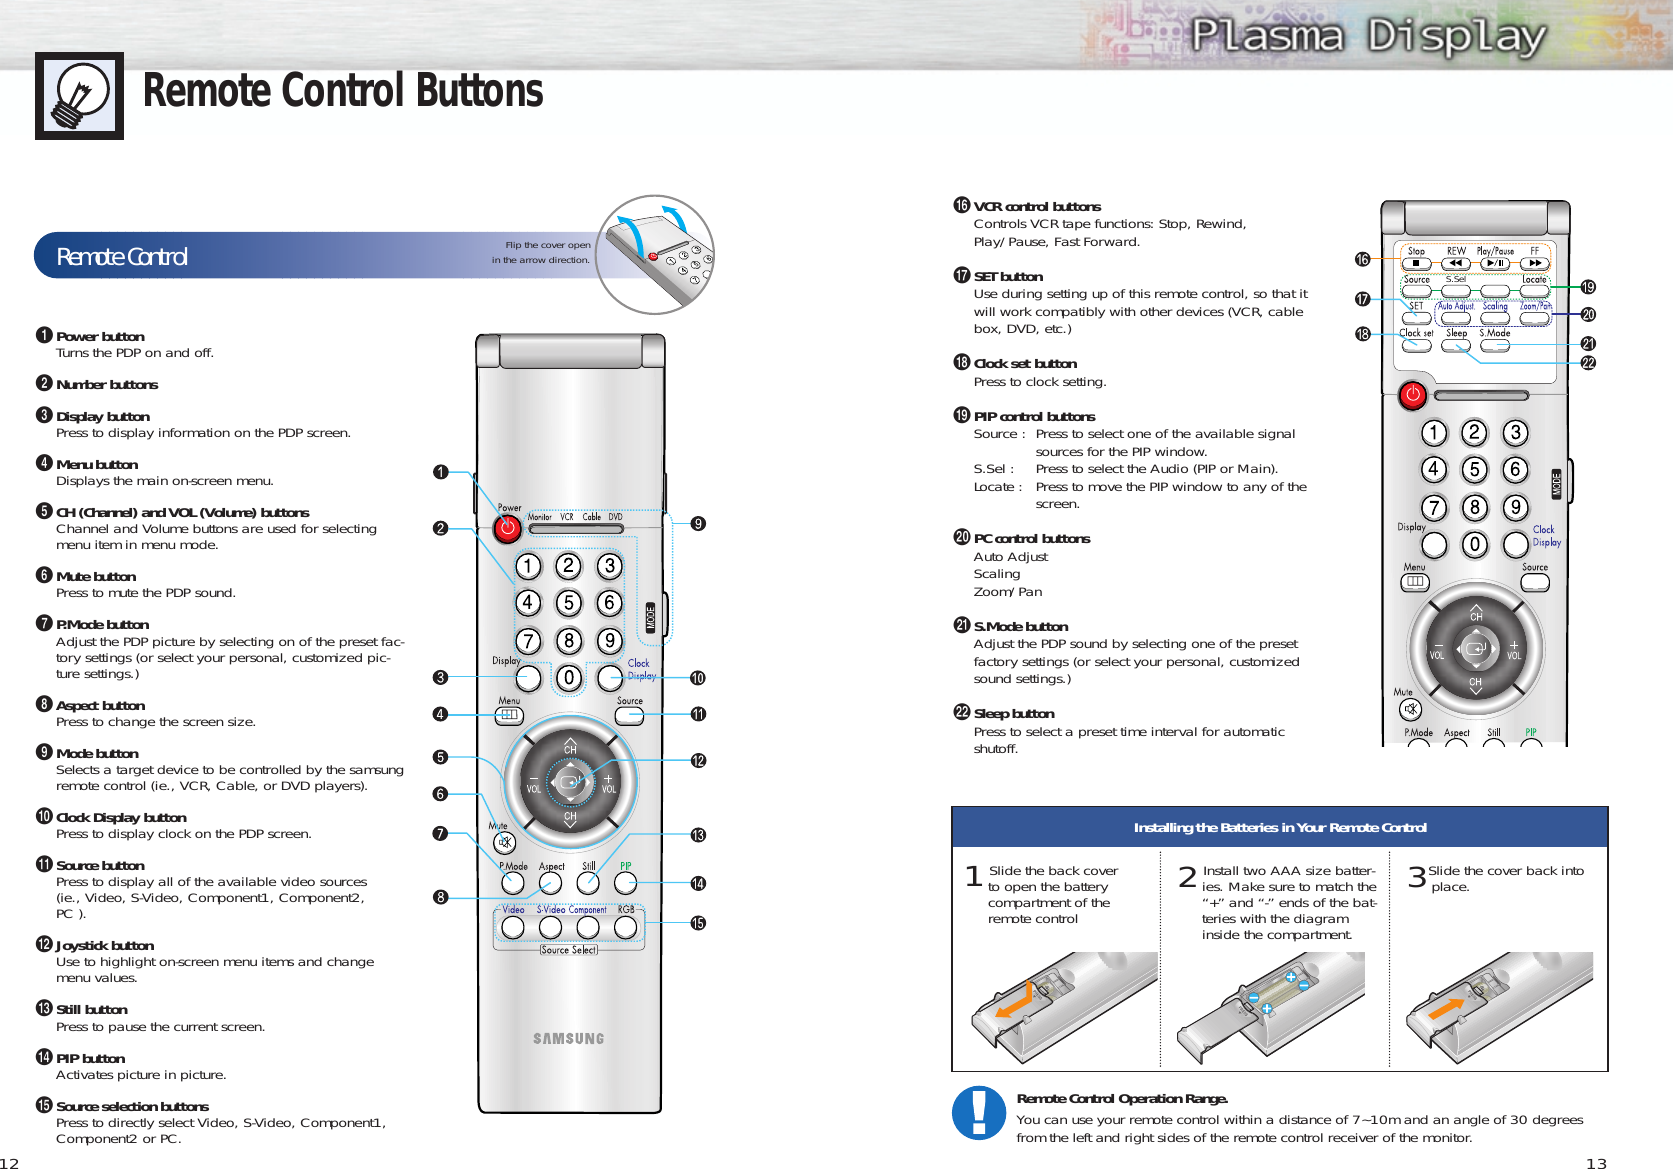 ıVCR control buttonsControls VCR tape functions: Stop, Rewind,Play/Pause, Fast Forward.˜SET buttonUse during setting up of this remote control, so that itwill work compatibly with other devices (VCR, cablebox, DVD, etc.)¯Clock set buttonPress to clock setting.˘PIP control buttonsSource : Press to select one of the available signalsources for the PIP window.S.Sel : Press to select the Audio (PIP or Main).Locate : Press to move the PIP window to any of thescreen.¿PC control buttonsAuto AdjustScalingZoom/Pan¸S.Mode buttonAdjust the PDP sound by selecting one of the presetfactory settings (or select your personal, customizedsound settings.)˛Sleep buttonPress to select a preset time interval for automatic shutoff.S.Sel13Remote Control ButtonsŒPower buttonTurns the PDP on and off.´Number buttonsˇDisplay buttonPress to display information on the PDP screen.¨Menu buttonDisplays the main on-screen menu.ˆCH (Channel) and VOL (Volume) buttonsChannel and Volume buttons are used for selectingmenu item in menu mode.ØMute buttonPress to mute the PDP sound.∏P.Mode buttonAdjust the PDP picture by selecting on of the preset fac-tory settings (or select your personal, customized pic-ture settings.)”Aspect buttonPress to change the screen size.’Mode buttonSelects a target device to be controlled by the samsungremote control (ie., VCR, Cable, or DVD players).˝Clock Display buttonPress to display clock on the PDP screen.ÔSource buttonPress to display all of the available video sources (ie., Video, S-Video, Component1, Component2, PC ).Joystick buttonUse to highlight on-screen menu items and changemenu values.ÒStill buttonPress to pause the current screen.ÚPIP buttonActivates picture in picture.ÆSource selection buttonsPress to directly select Video, S-Video, Component1,Component2 or PC. 12Remote ControlFlip the cover openin the arrow direction.Installing the Batteries in Your Remote Control1Slide the back coverto open the batterycompartment of theremote control3Slide the cover back intoplace.2Install two AAA size batter-ies. Make sure to match the“+” and “-” ends of the bat-teries with the diagraminside the compartment.Remote Control Operation Range.You can use your remote control within a distance of 7~10m and an angle of 30 degreesfrom the left and right sides of the remote control receiver of the monitor.